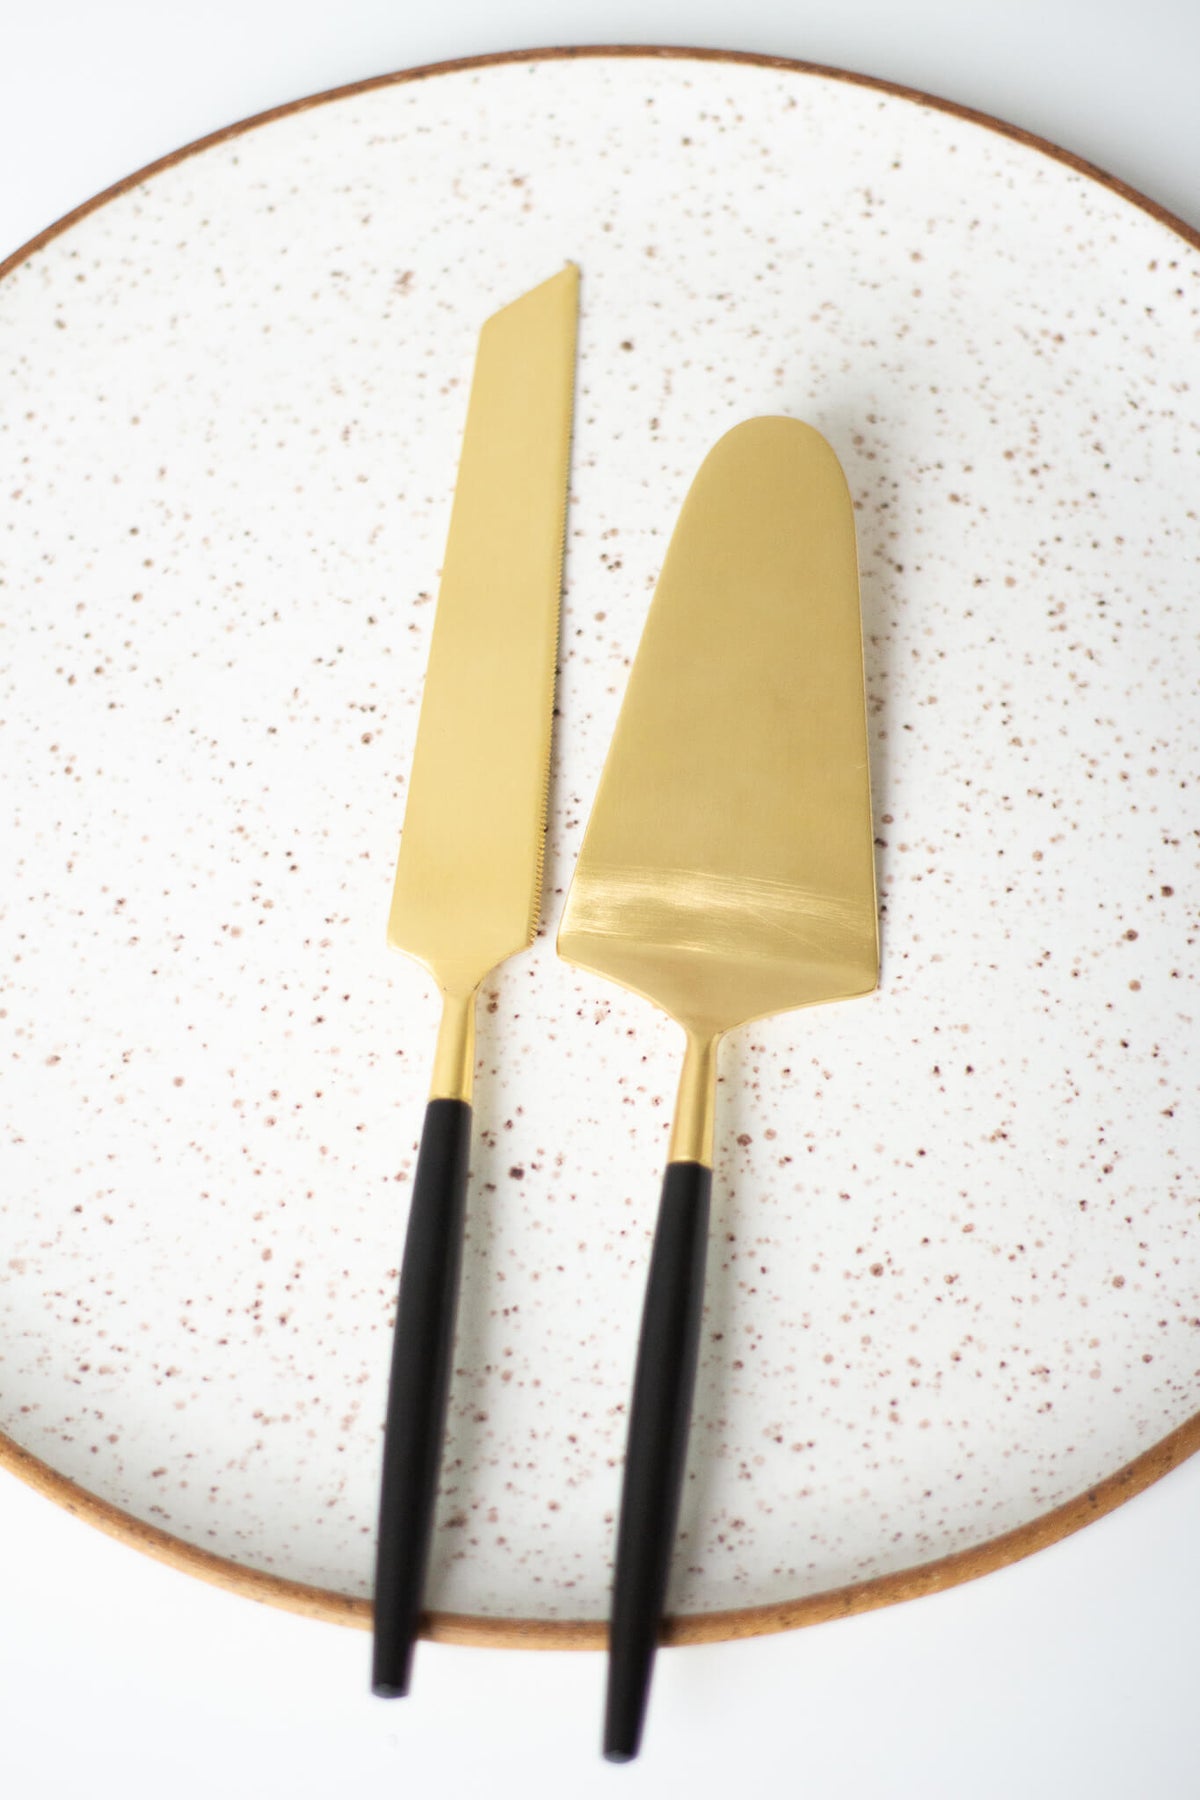 Be Home Black + Gold Cake Lift and Knife Set